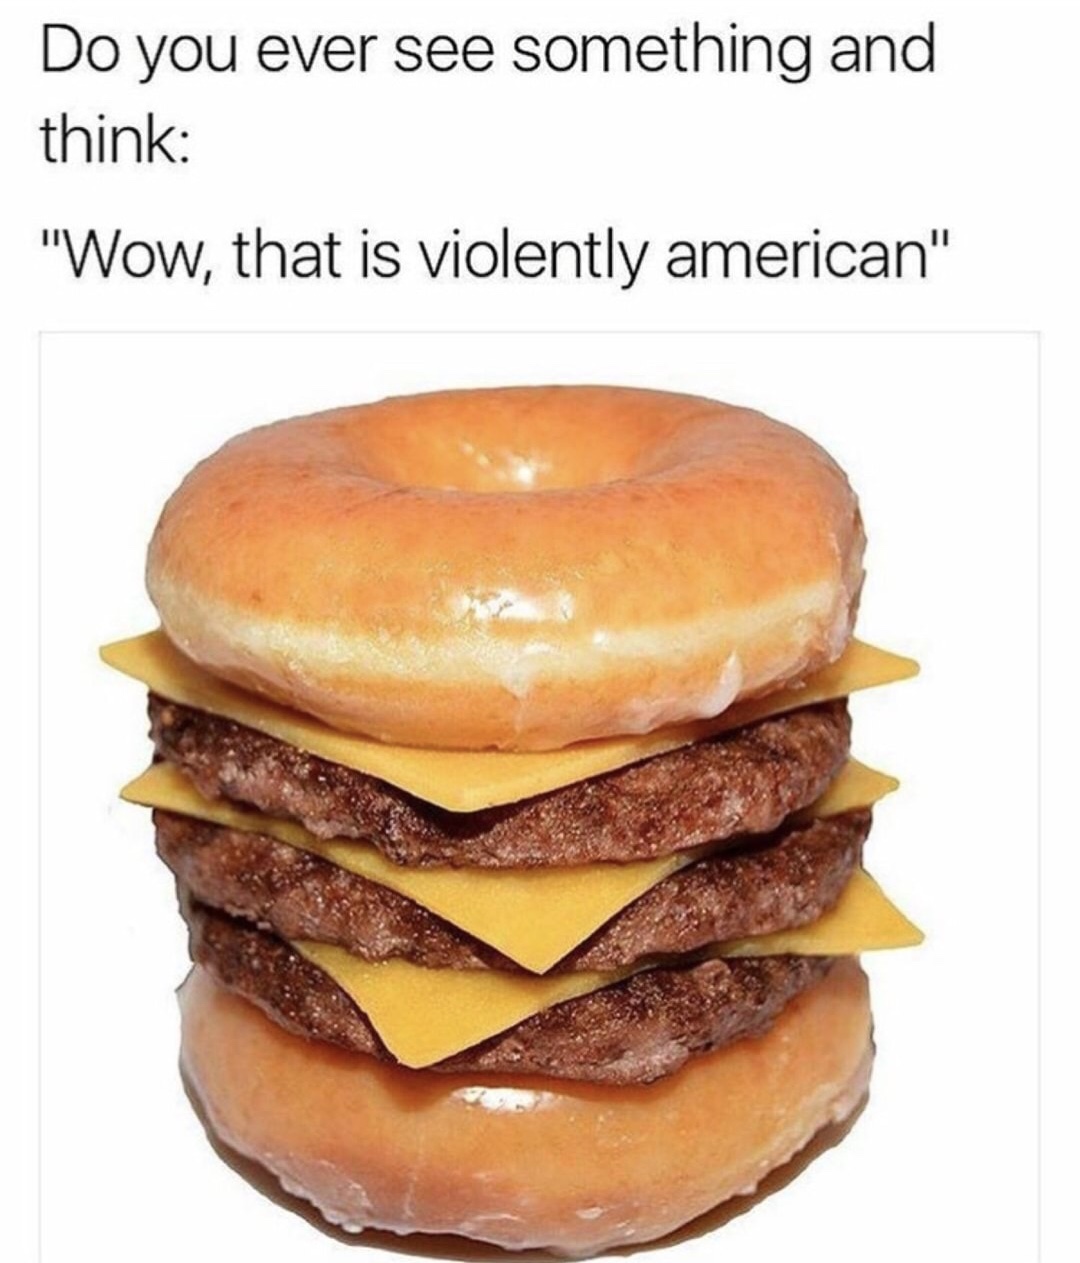 memes - violently american - Do you ever see something and think "Wow, that is violently american"